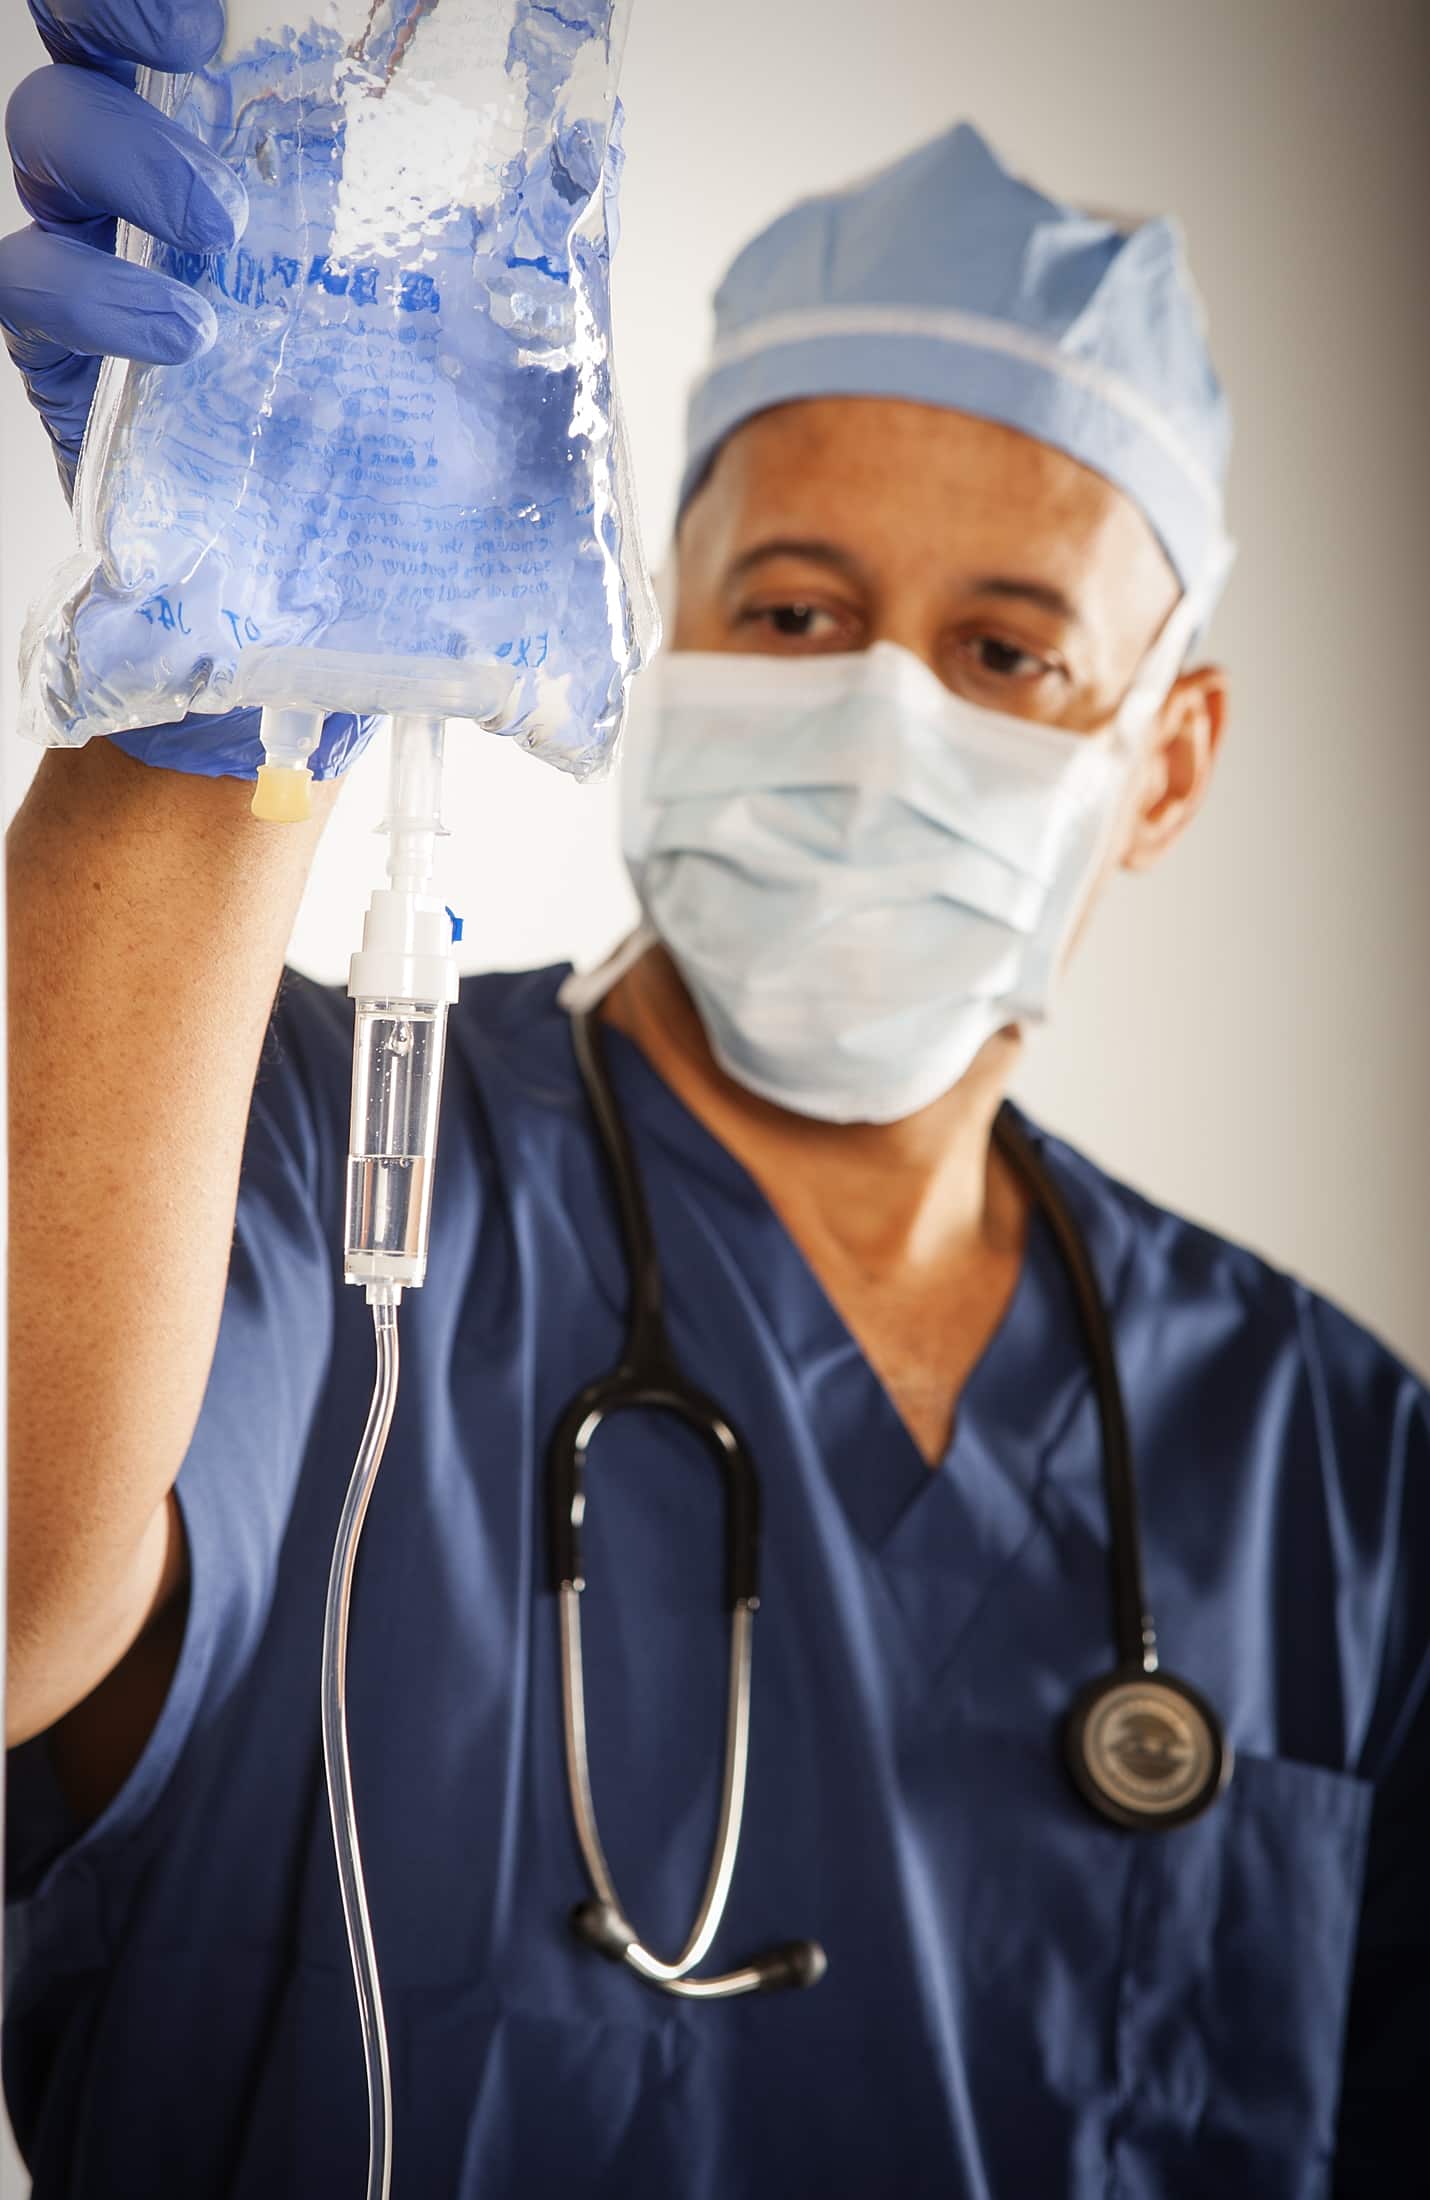 Benchmarking in Anesthesia Services